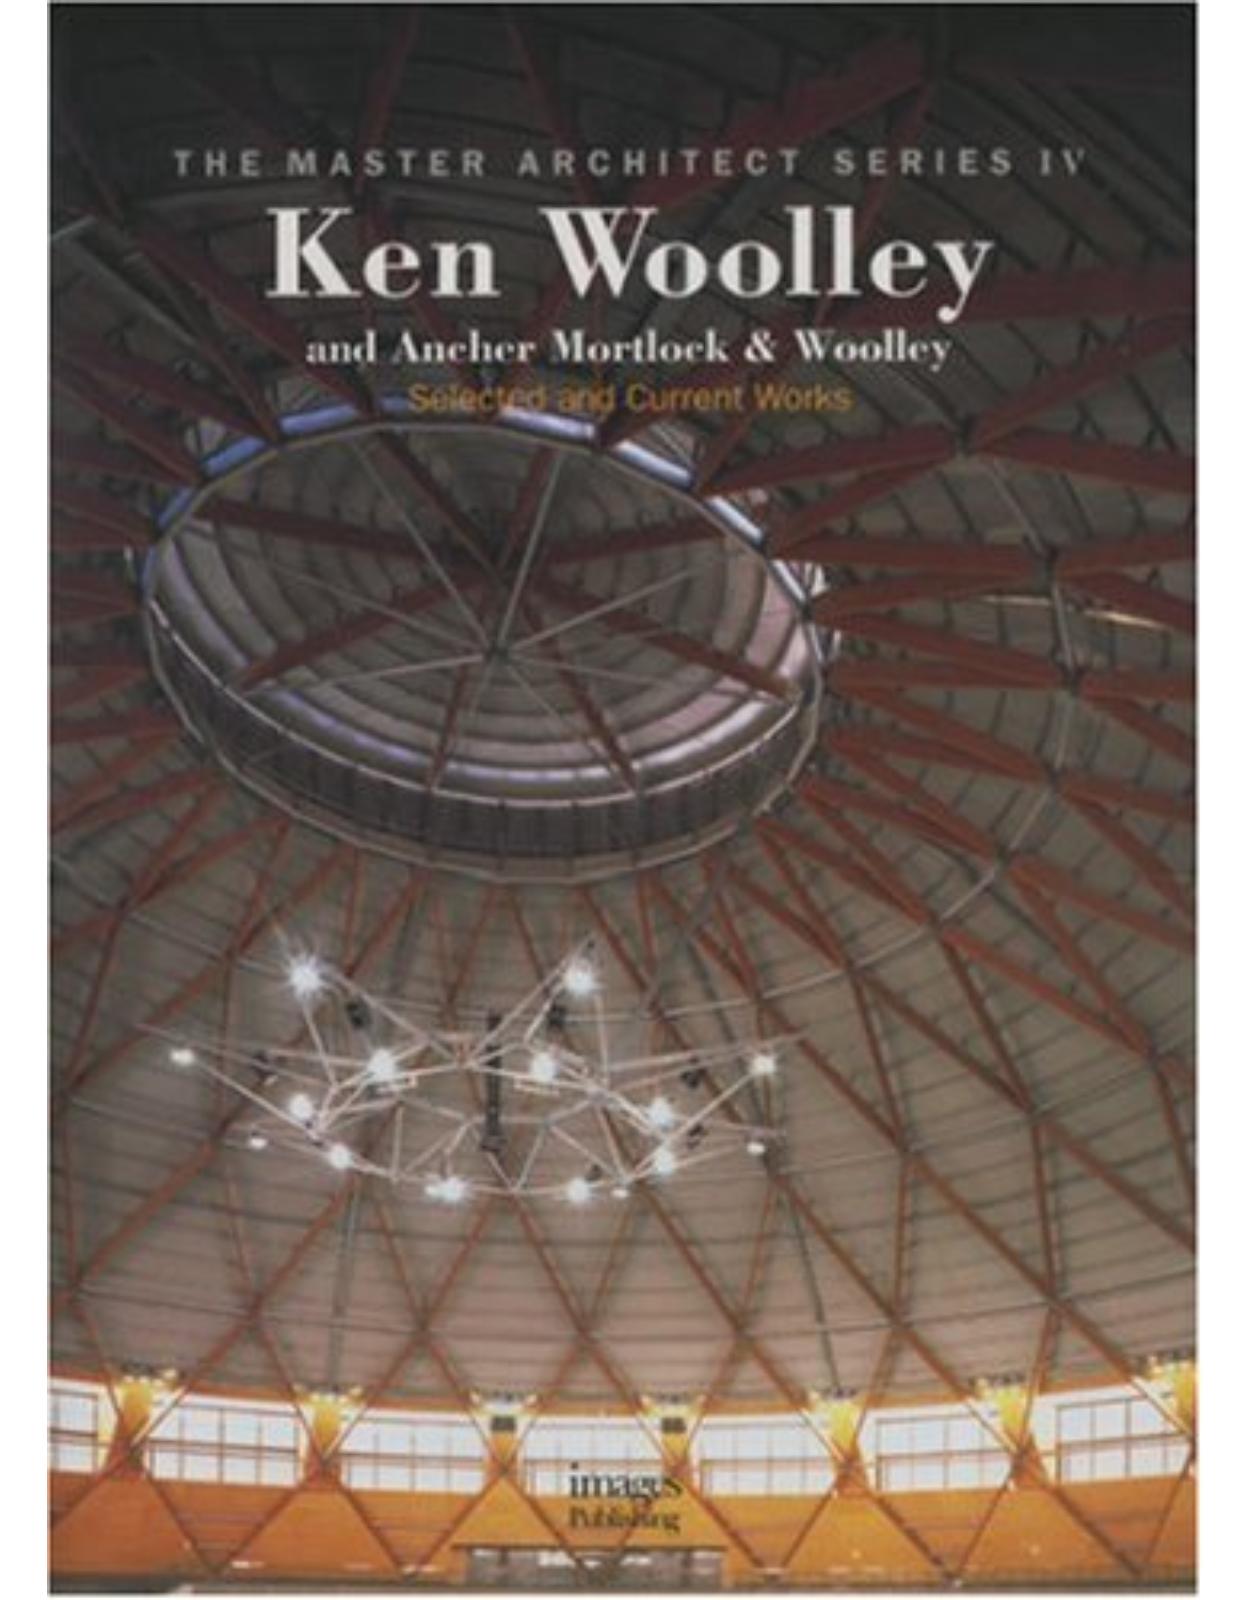 Ken Woolley and Ancheer Mortlock and Woolley: Selected and Current Works (Master Architect Series IV)